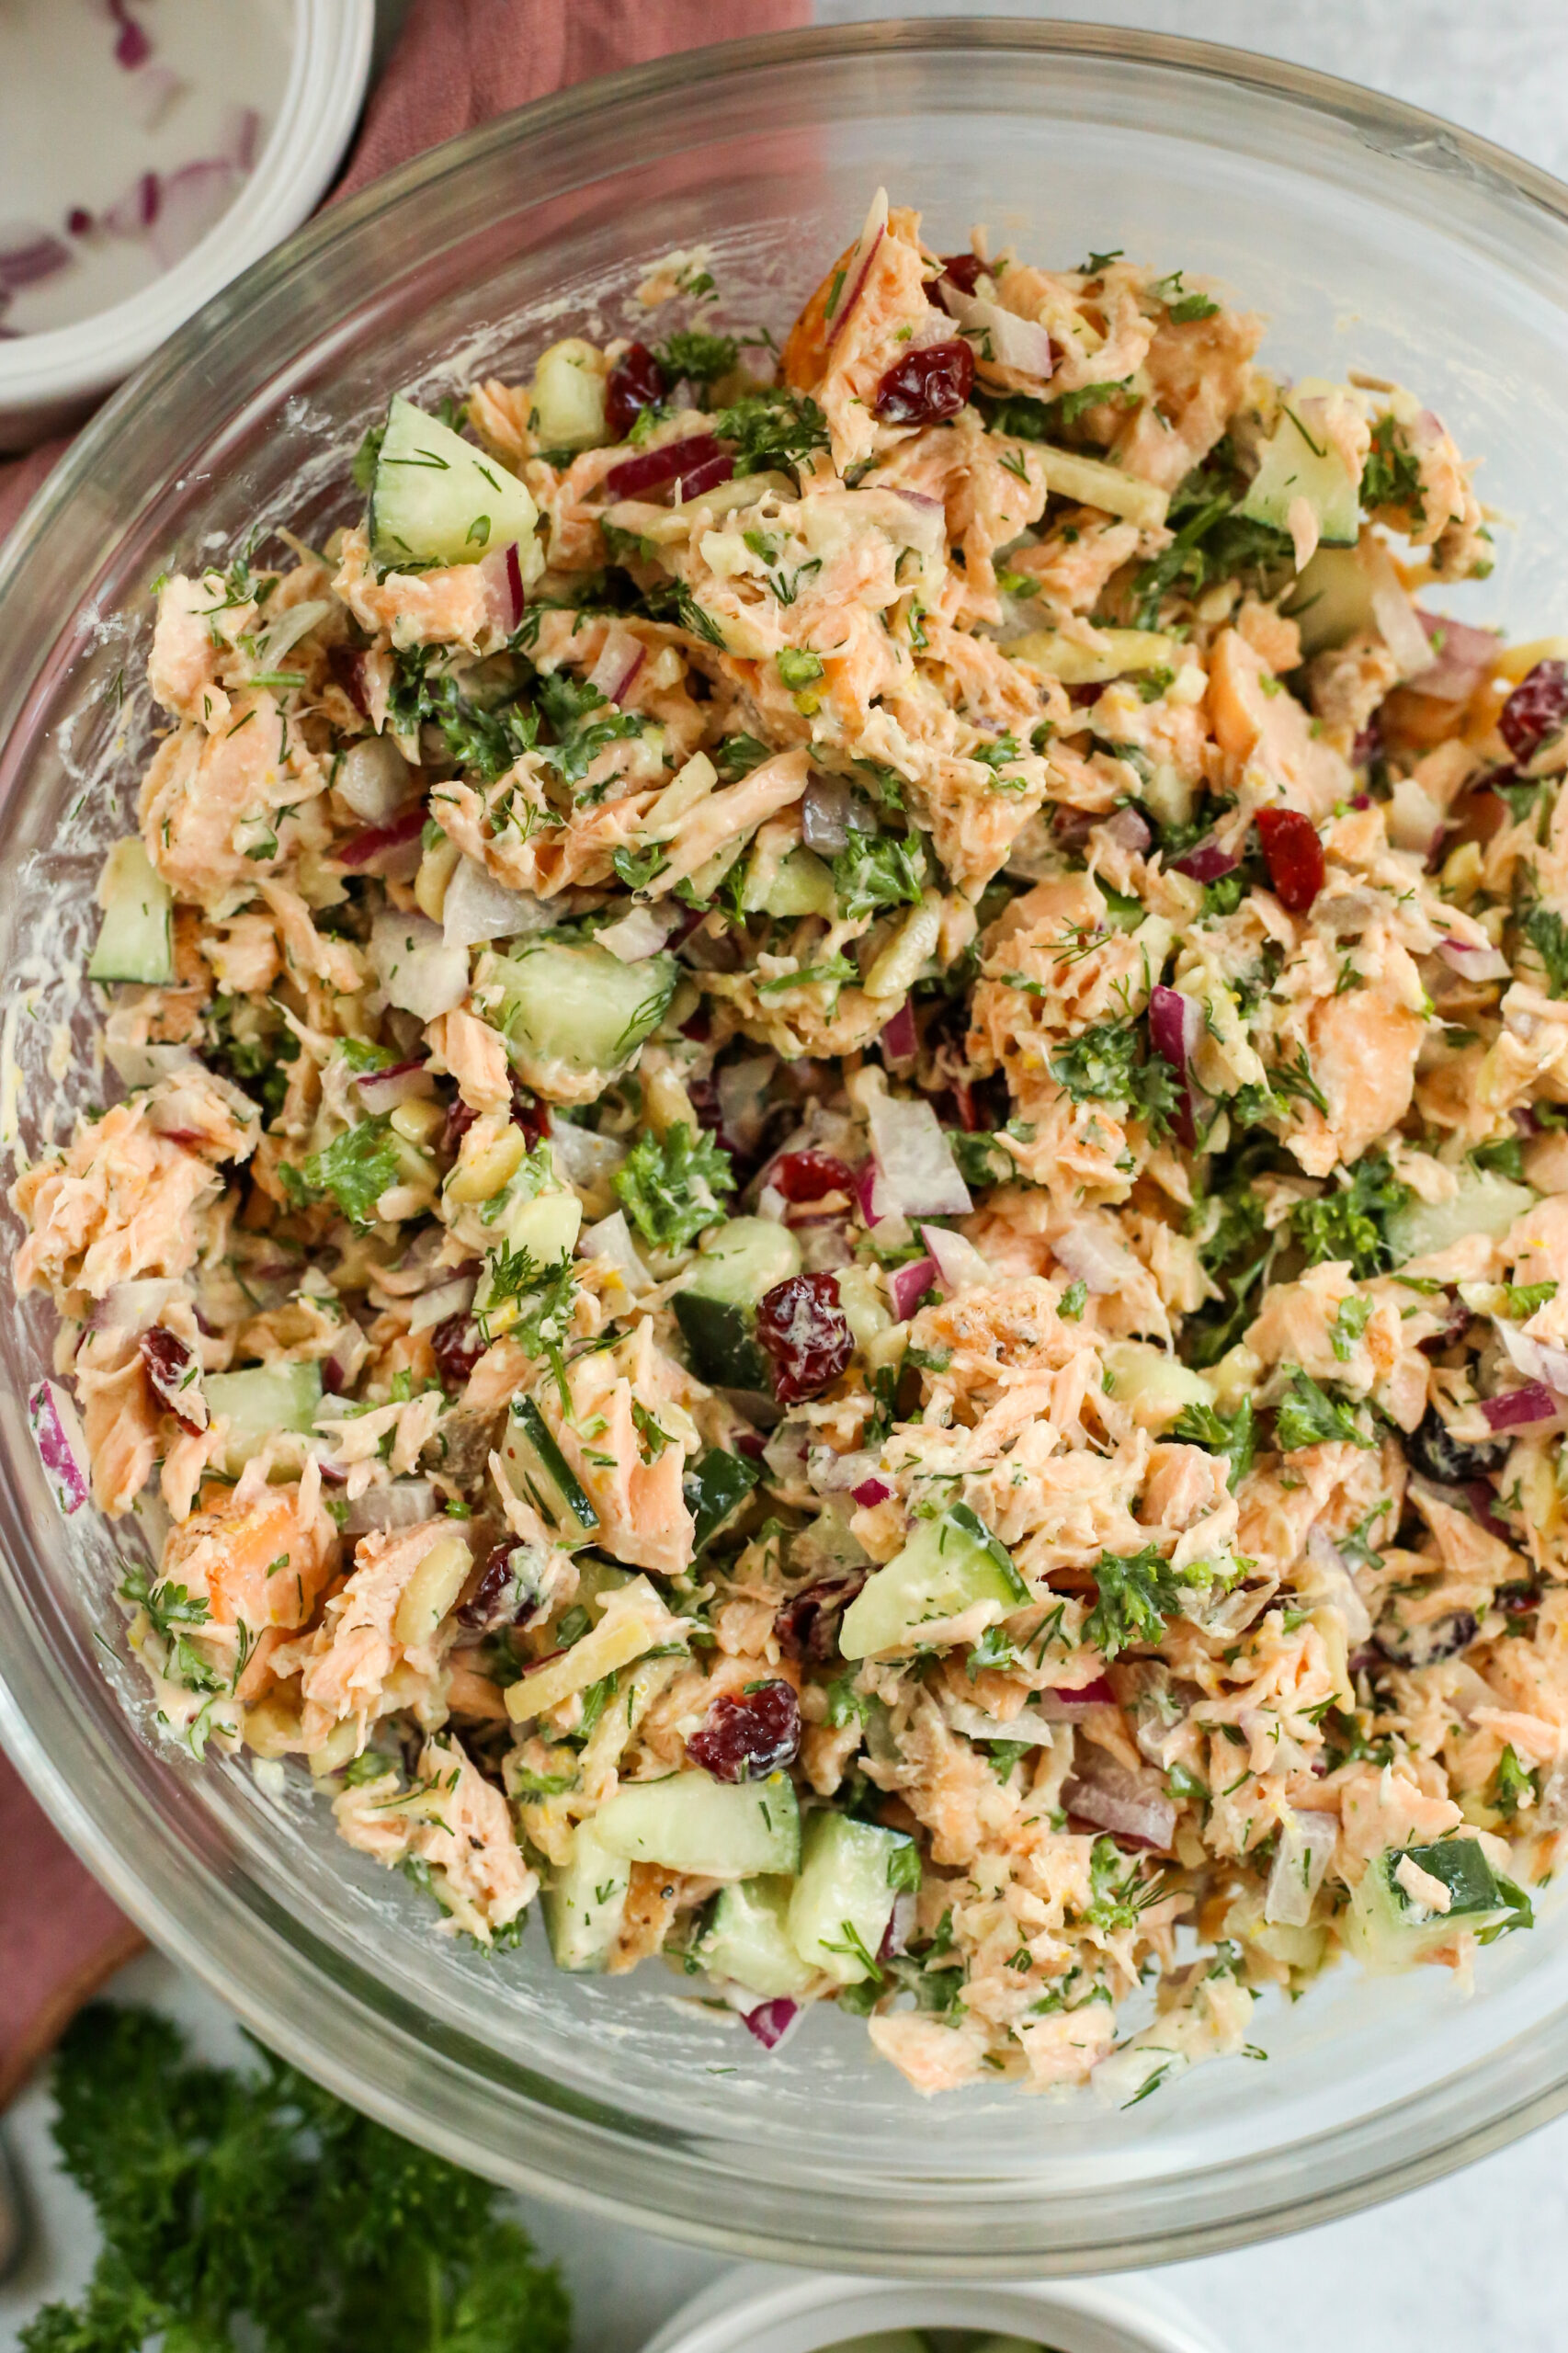 Close up view of a salmon salad for lunch, showing flakes of cooked salmon mixed with diced cucumbers and red onions, slivered almonds, dried cranberries, fresh parsley, and fresh dill, all lightly dressed in a creamy dressing